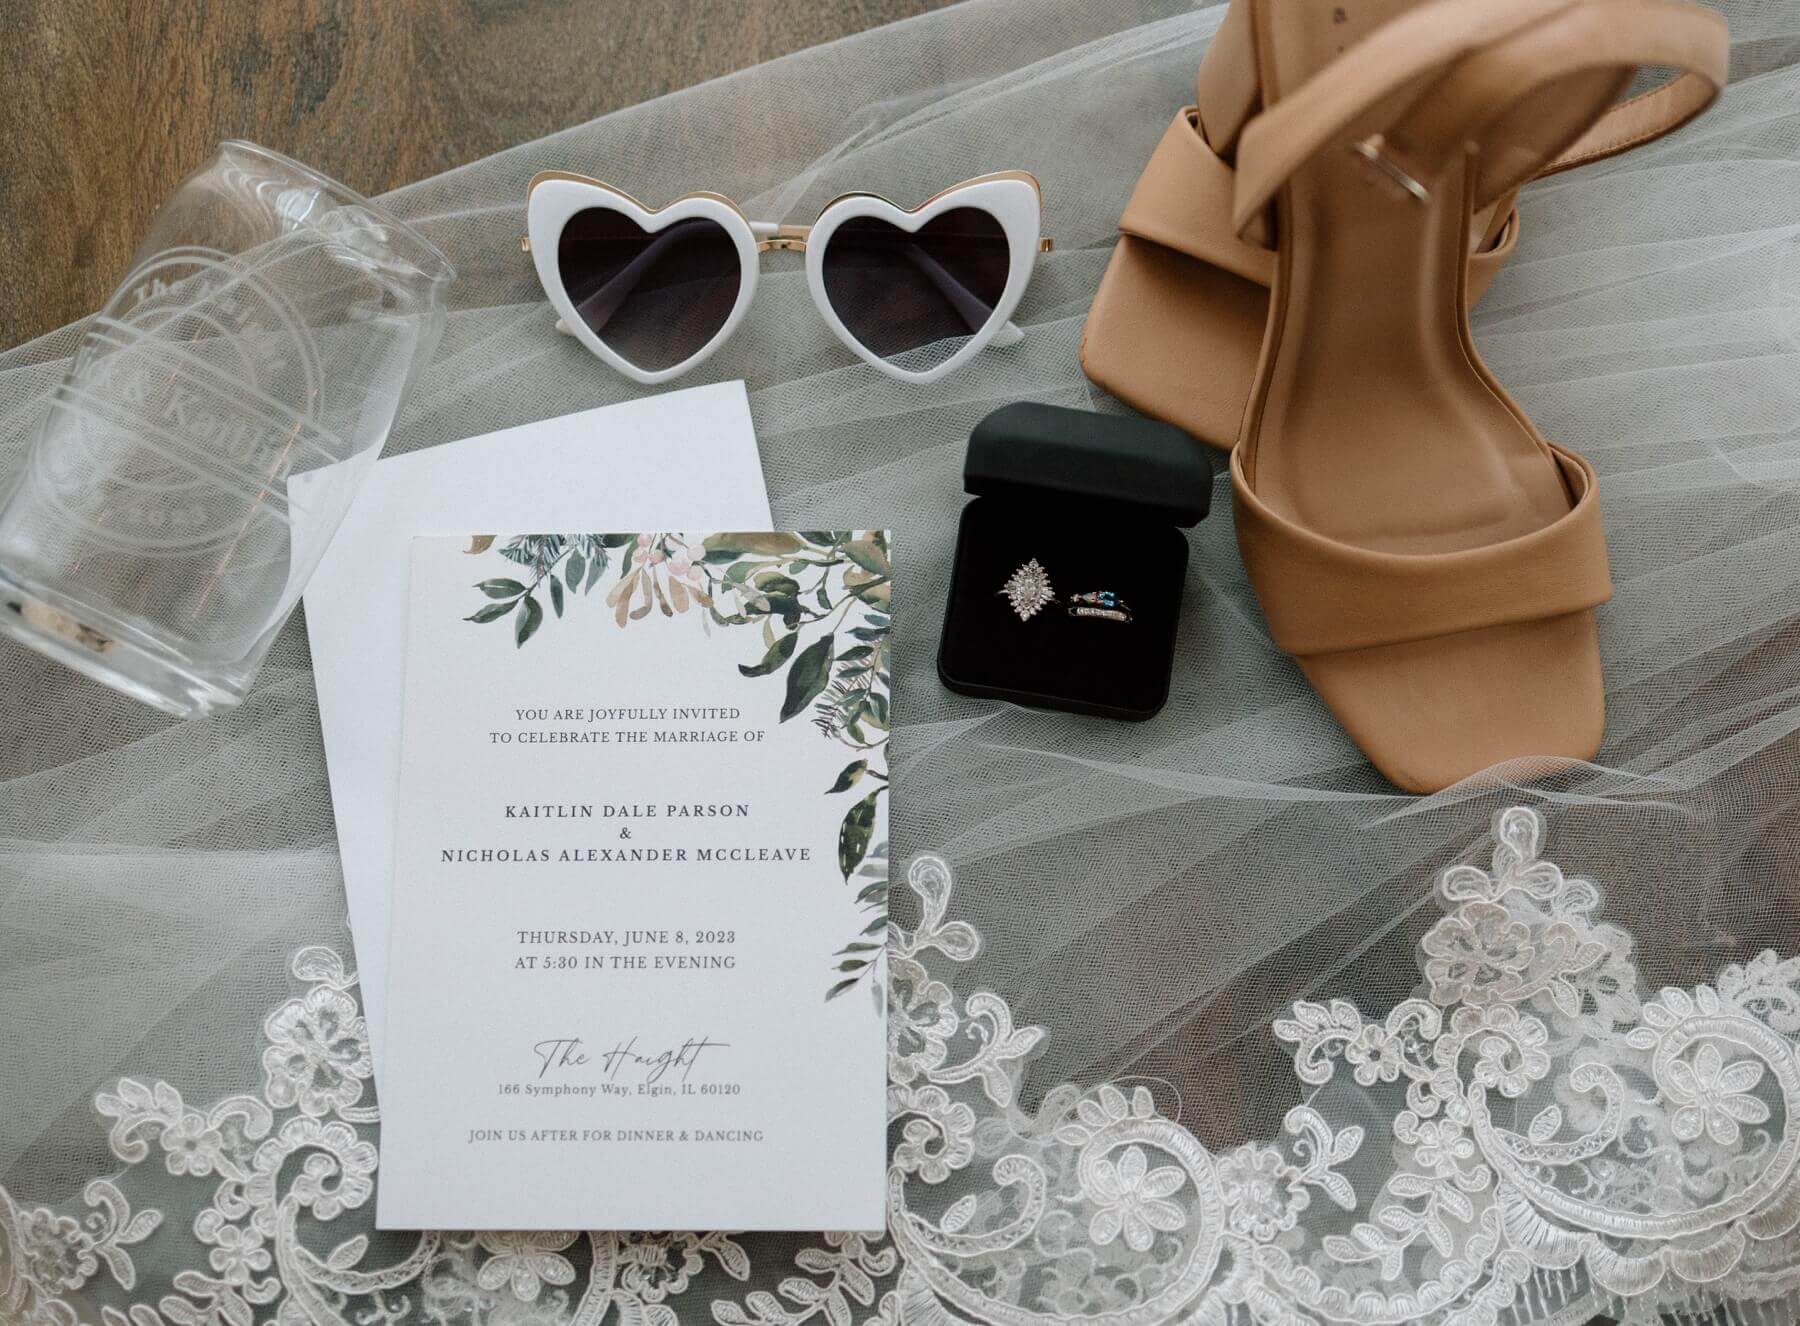 Wedding invitation with rings in ring box and heart sunglasses on veil